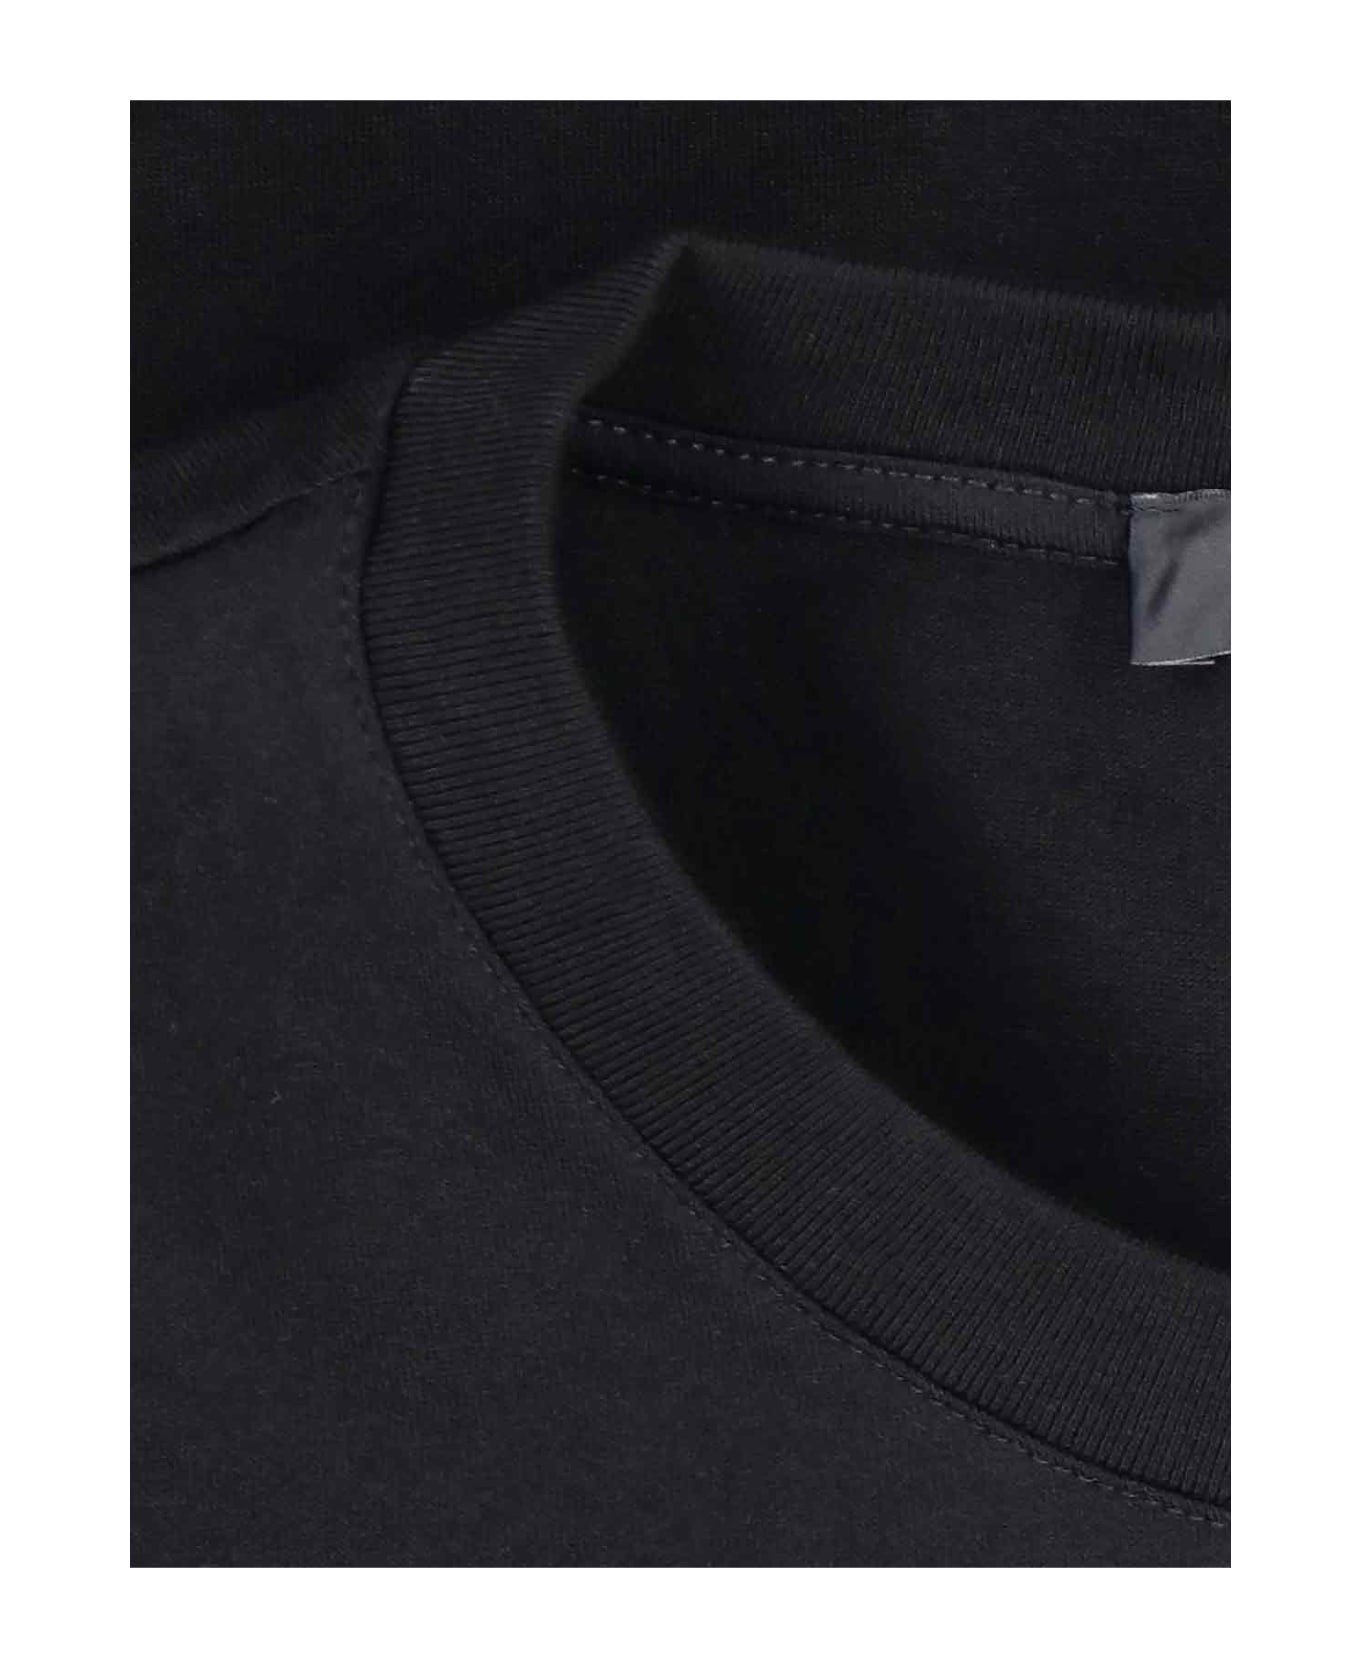 Versace Black Crewneck T-shirt With Contrasting Logo Lettering Print In Cotton Man - Black